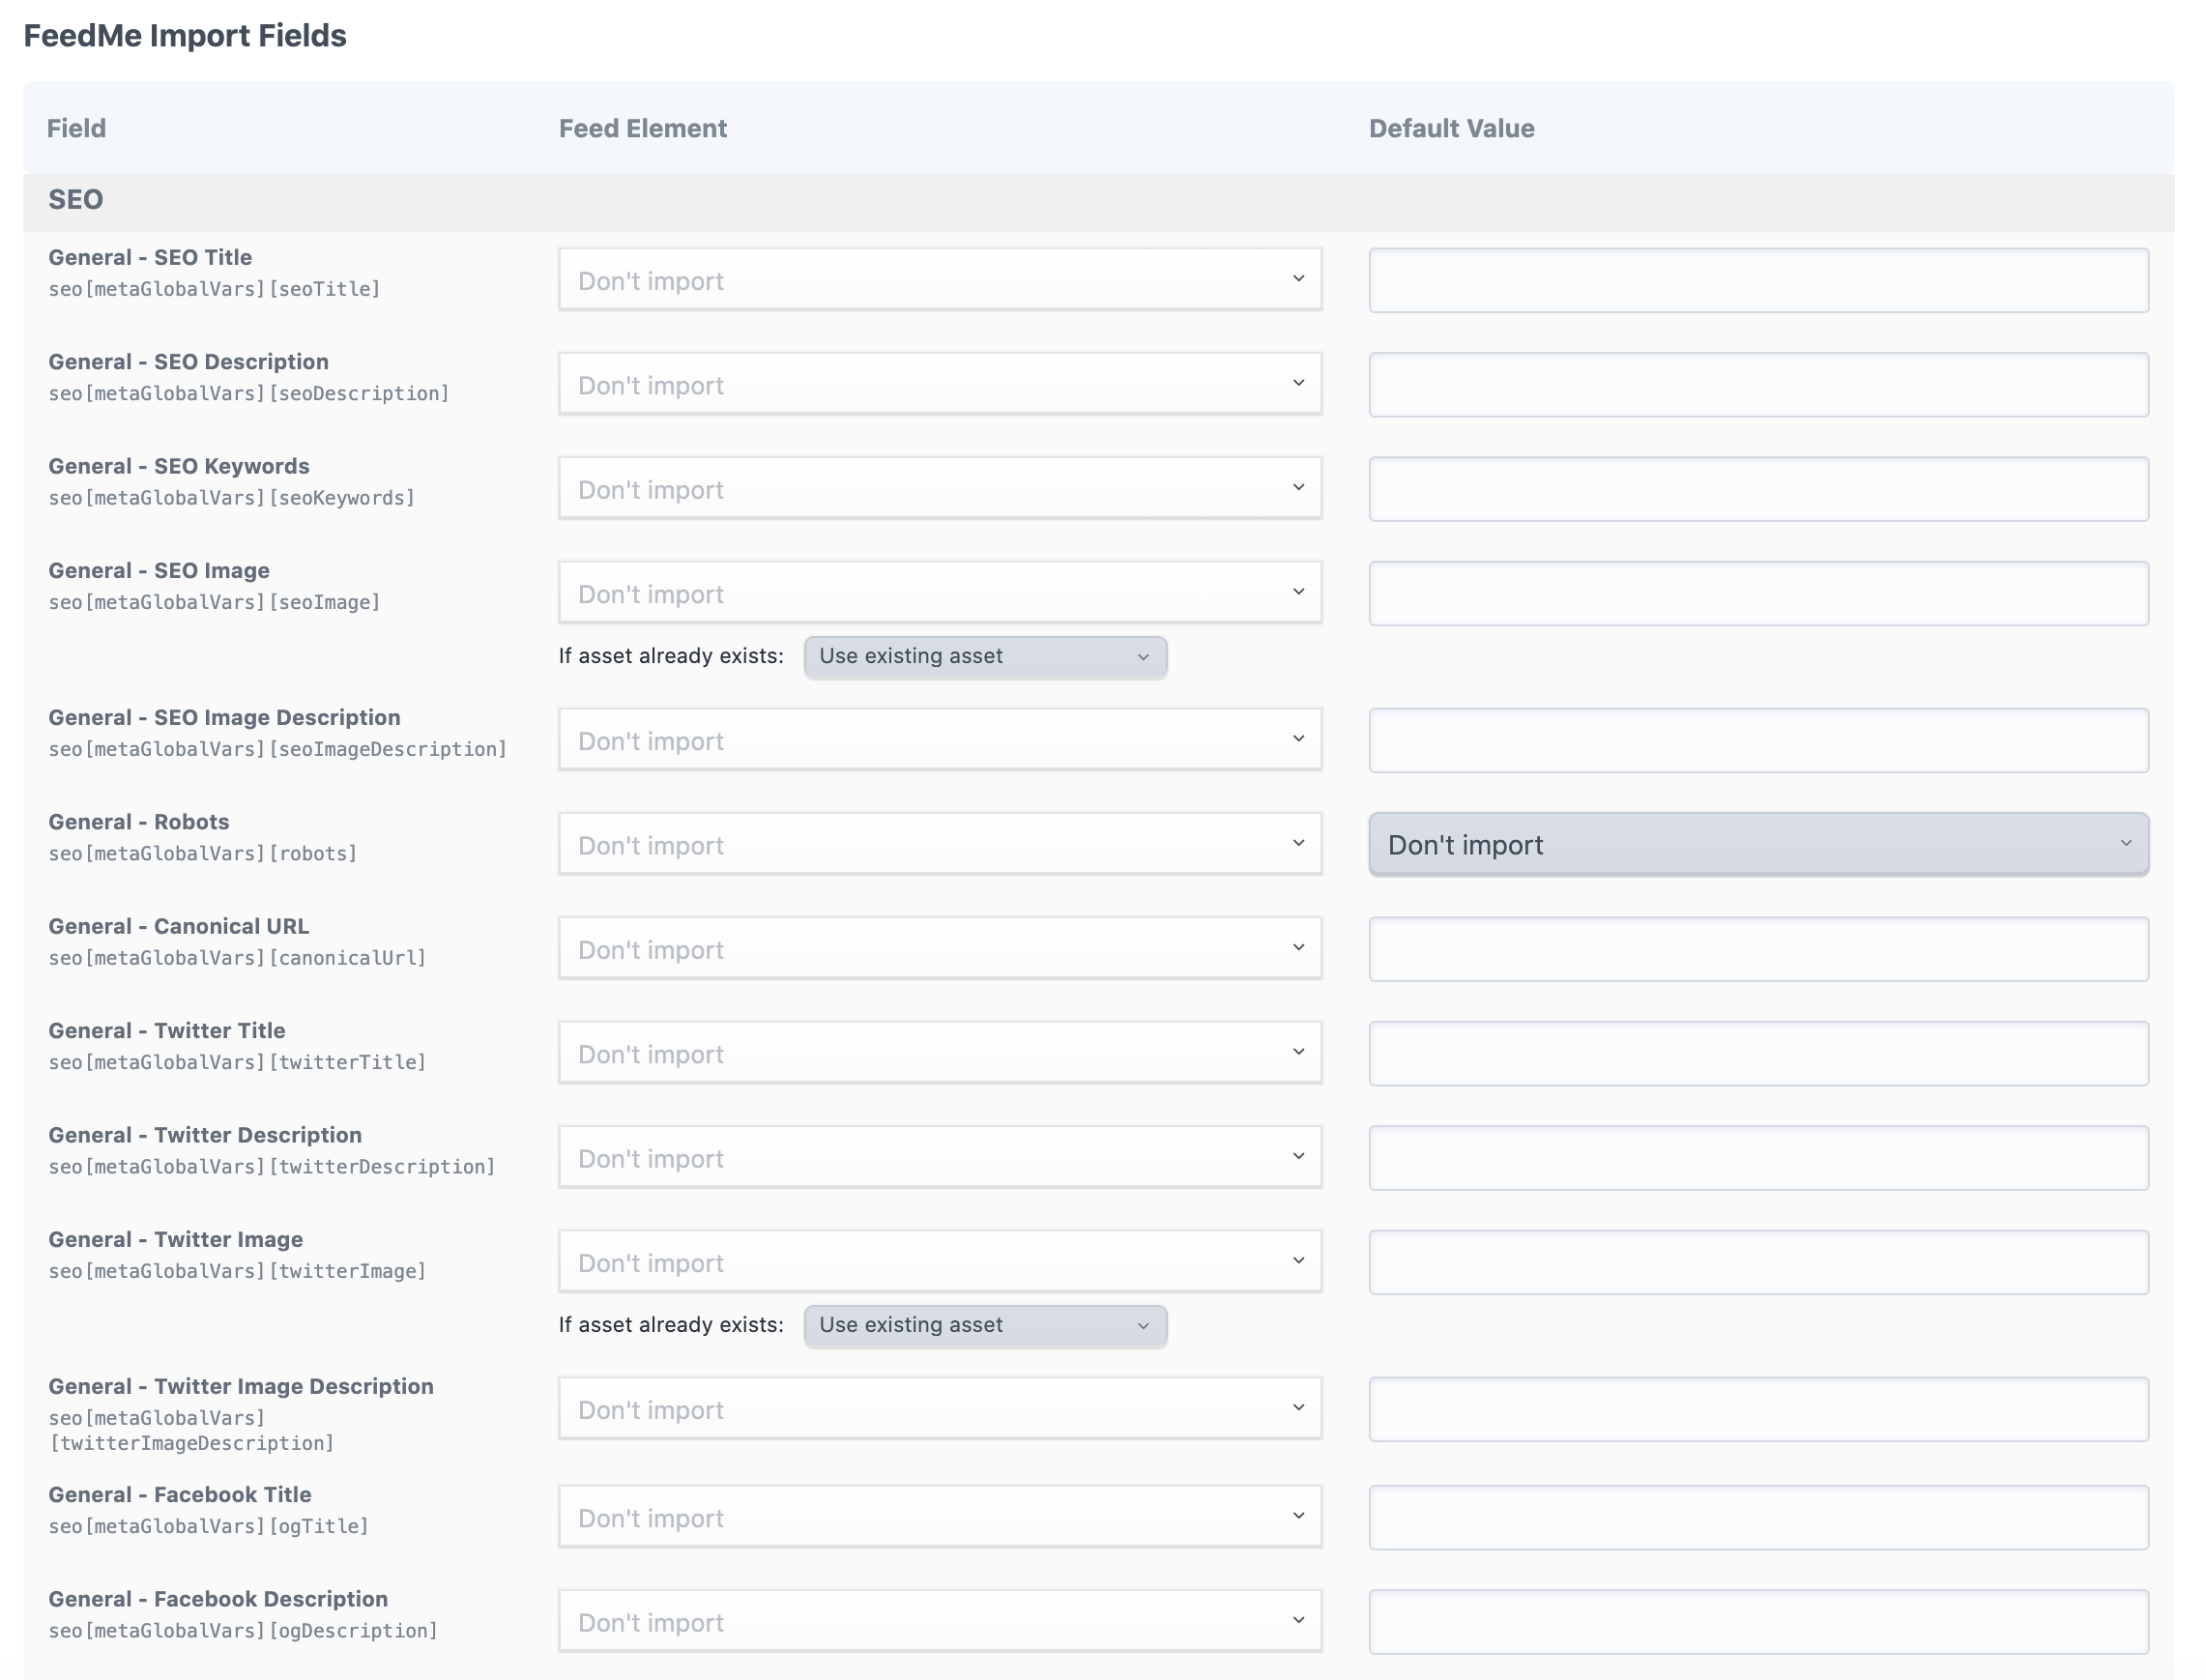 Screenshot of Feed Me import fields with a long list of SEO mappings